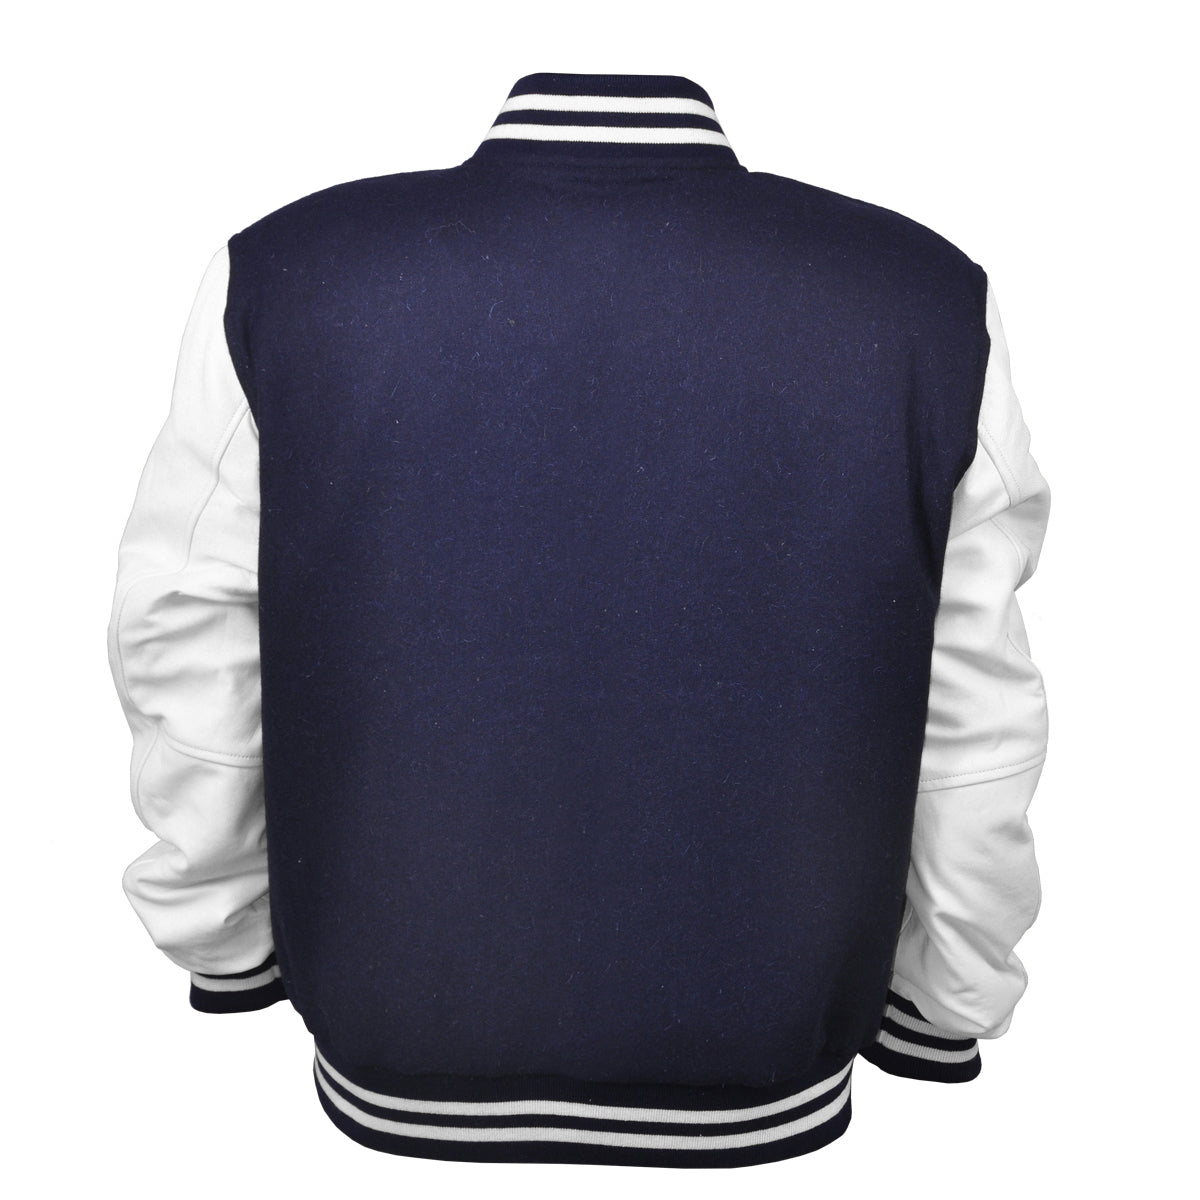 Men’s Varsity Jacket Faux Leather Sleeve and Wool Body Navy/White